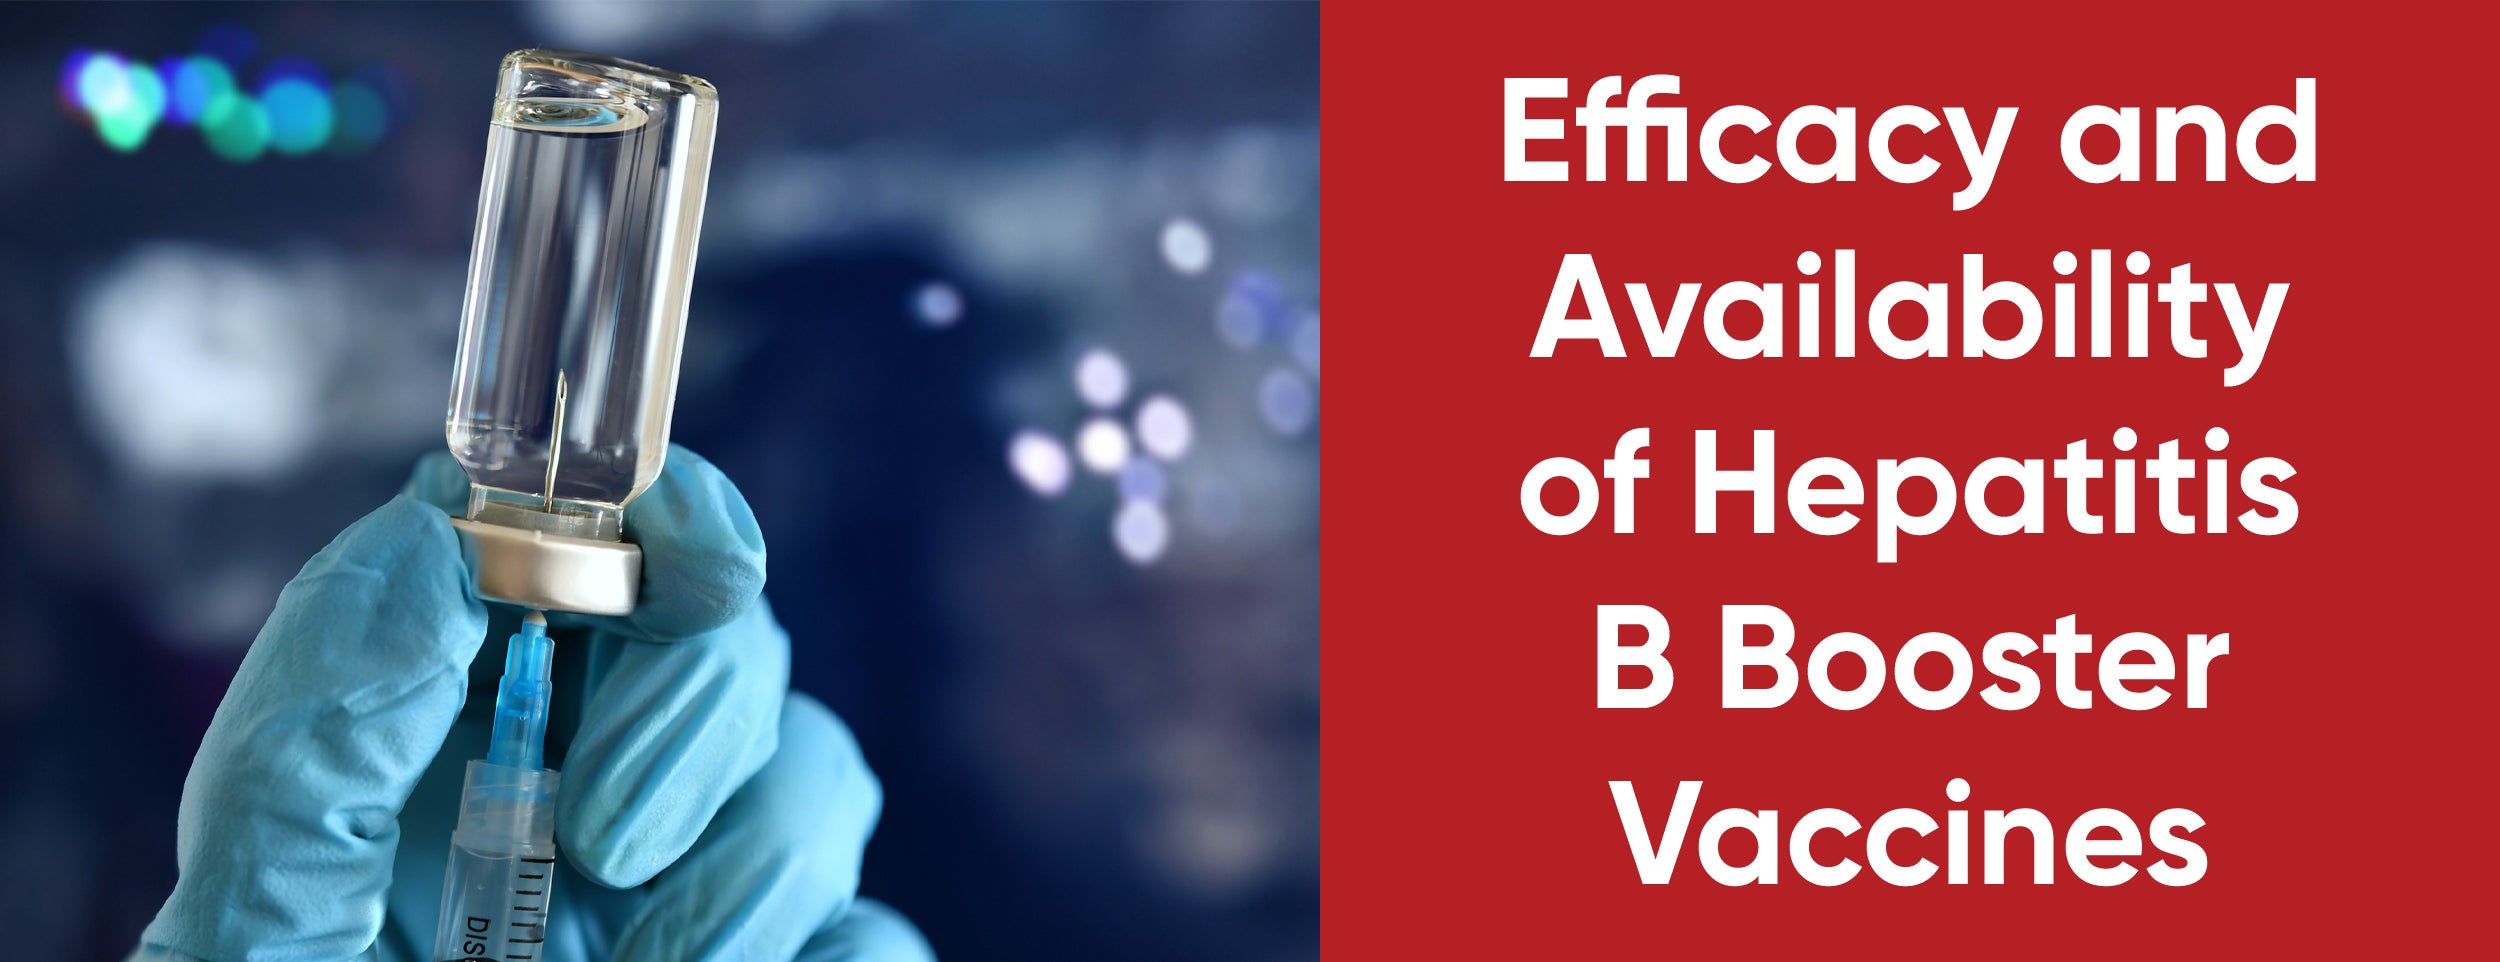 Hepatitis B booster vaccine efficacy and availability